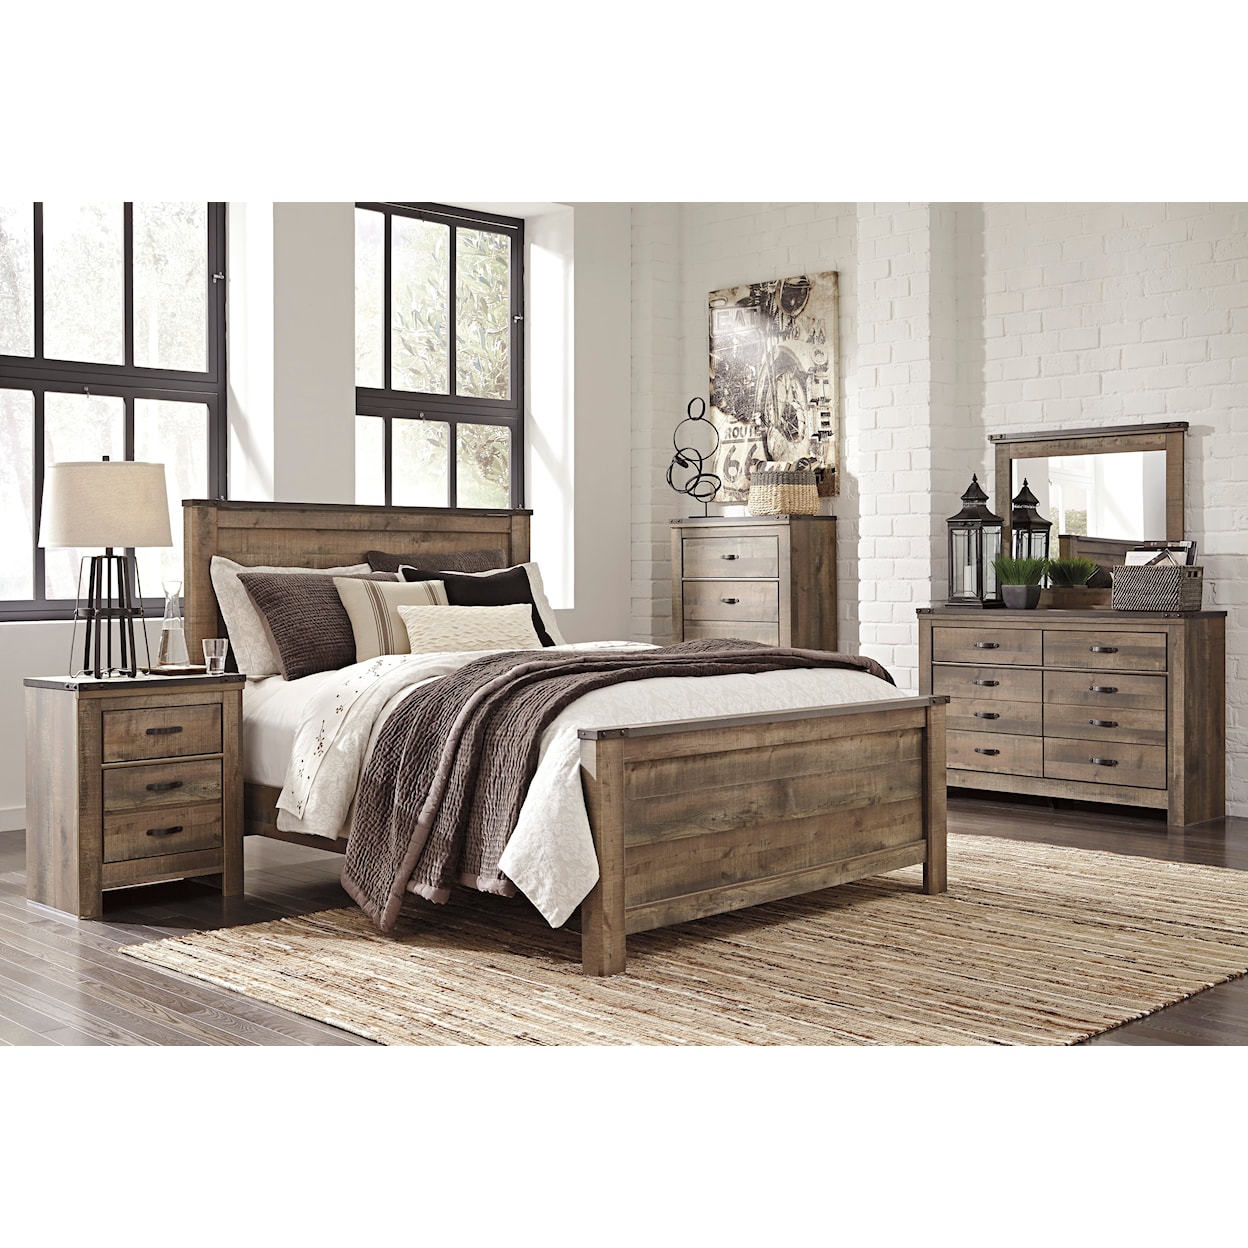 Signature Design by Ashley Trinell 4-Piece Bedroom Group